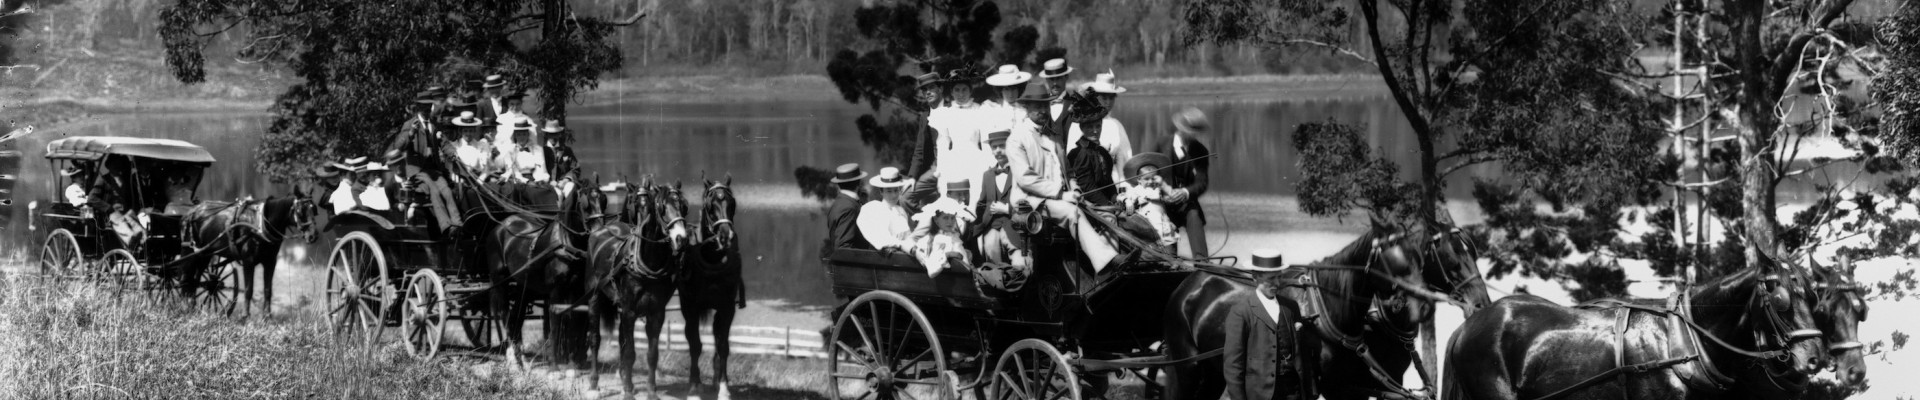 Day trippers travelling to Enoggera Reservoir Brisbane ca 1896